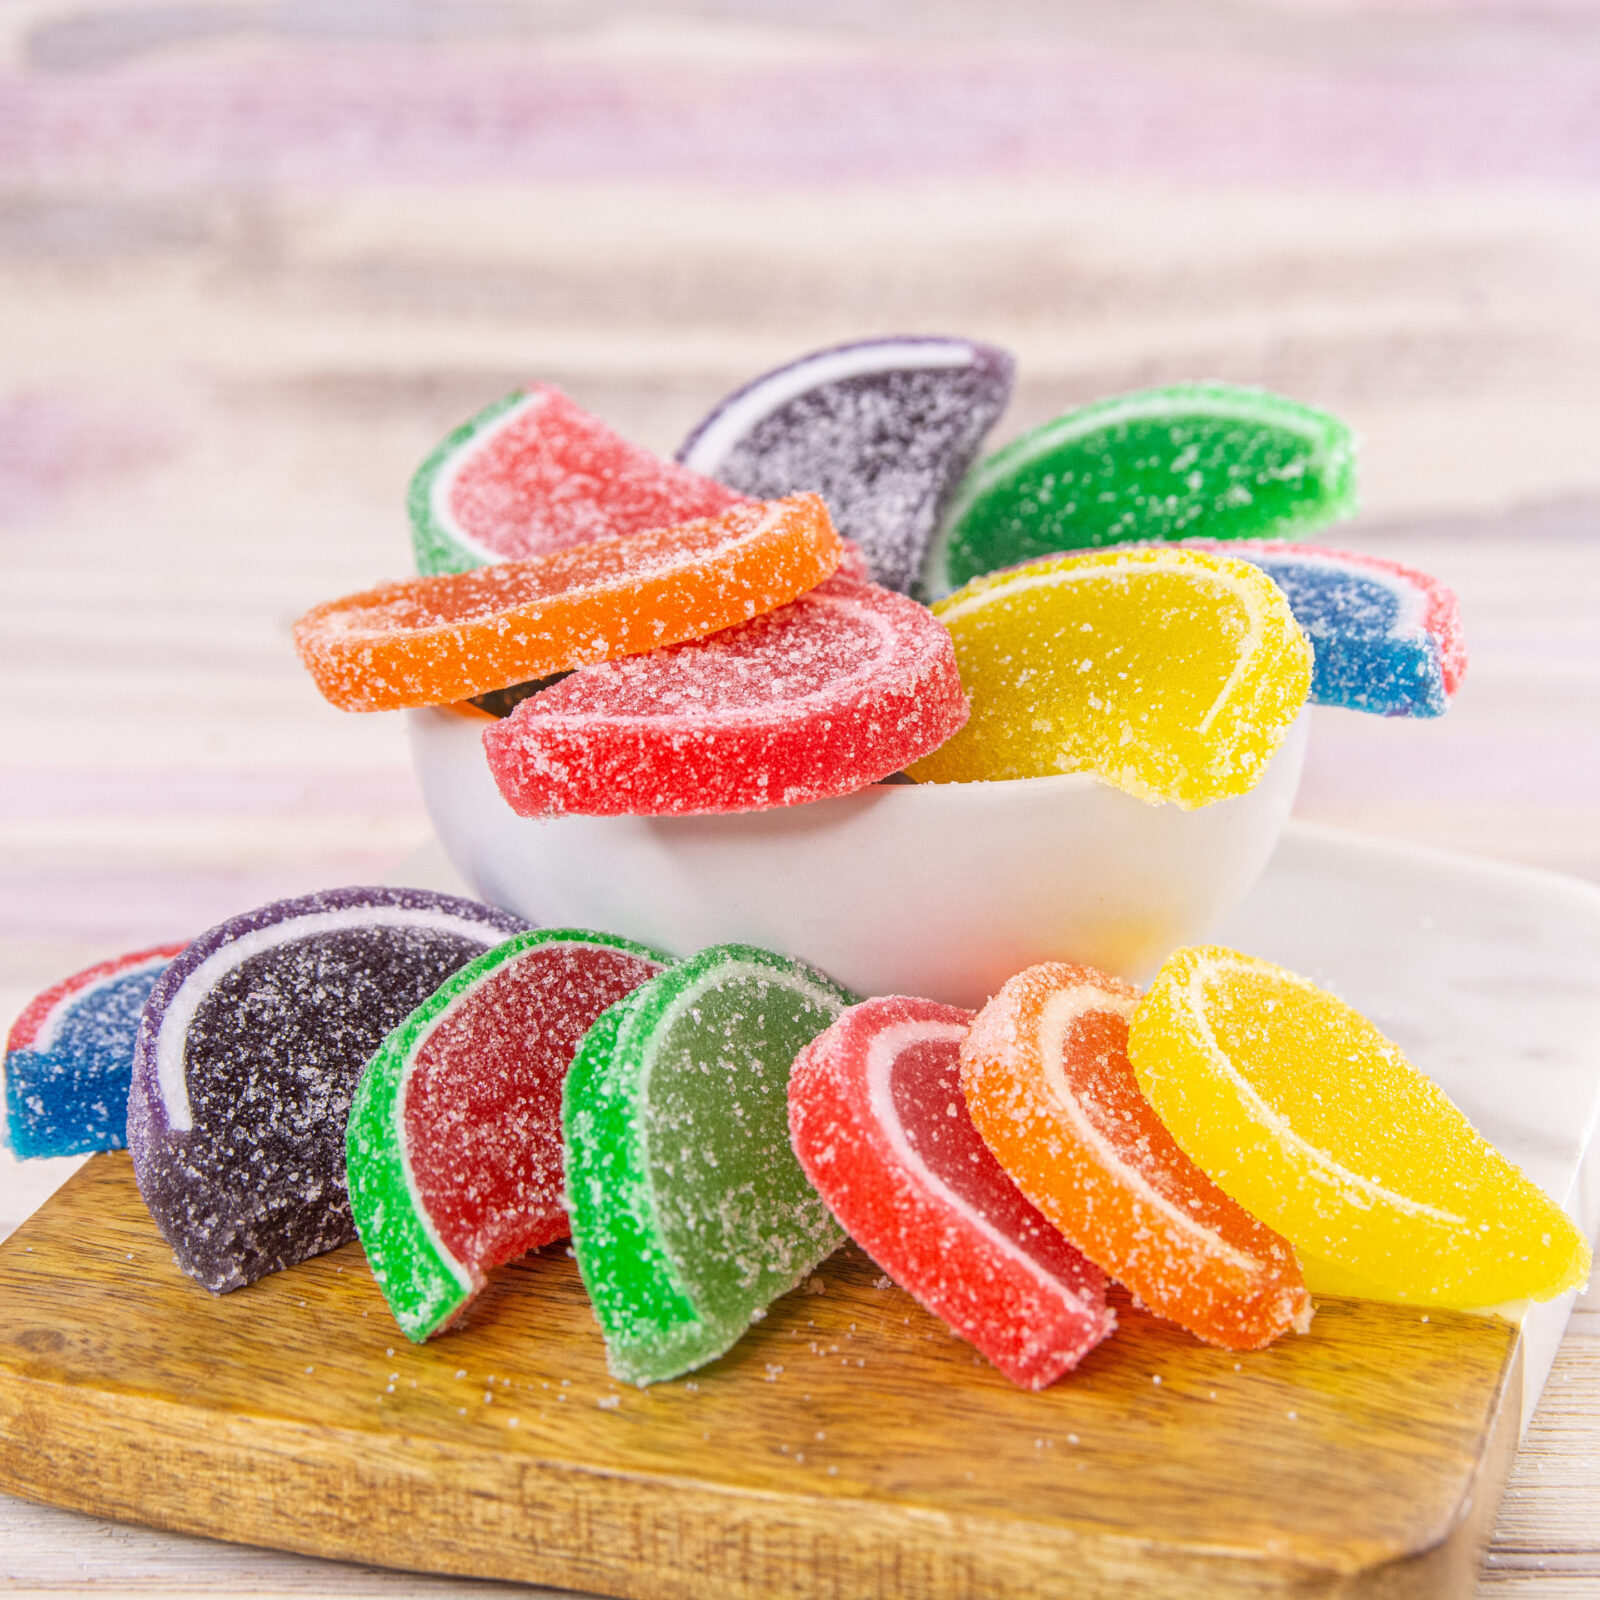 [SUGAR FREE] Candy Fruit Slices 1